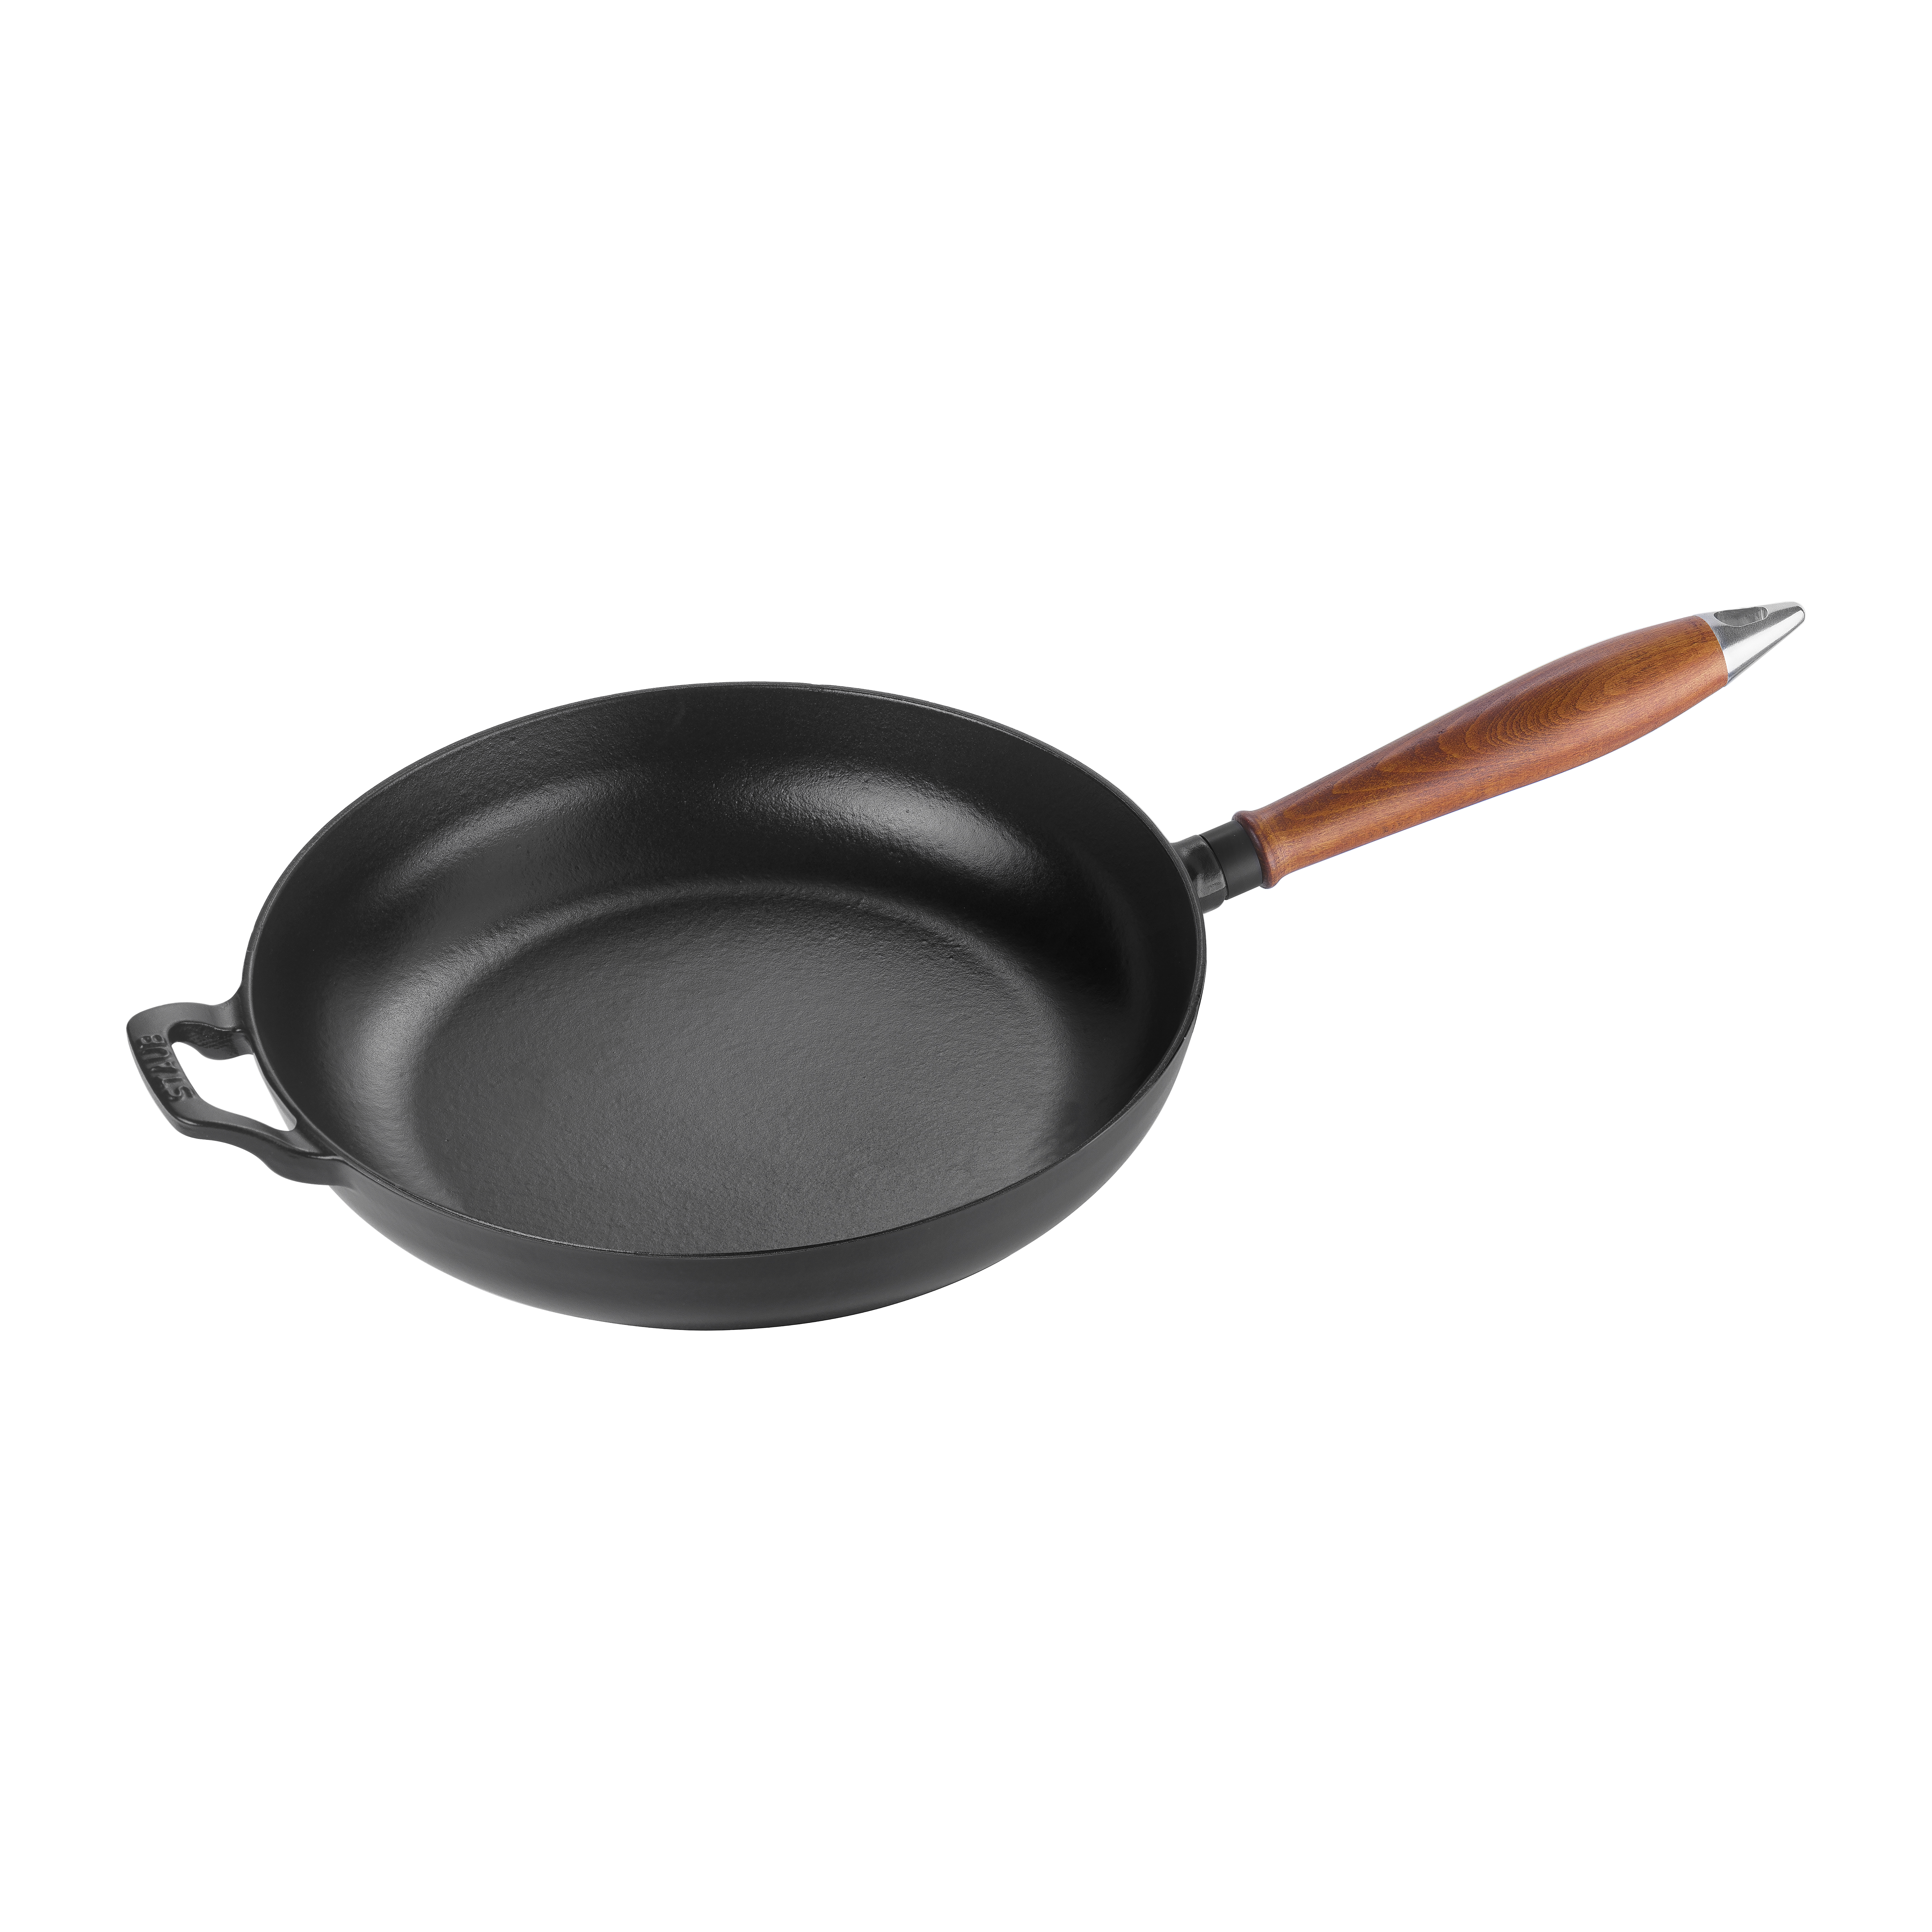 https://www.nordicnest.com/assets/blobs/staub-vintage-frying-pan-with-wooden-handle-28-cm-black/502882-01_1_ProductImageMain-3a01349237.jpg